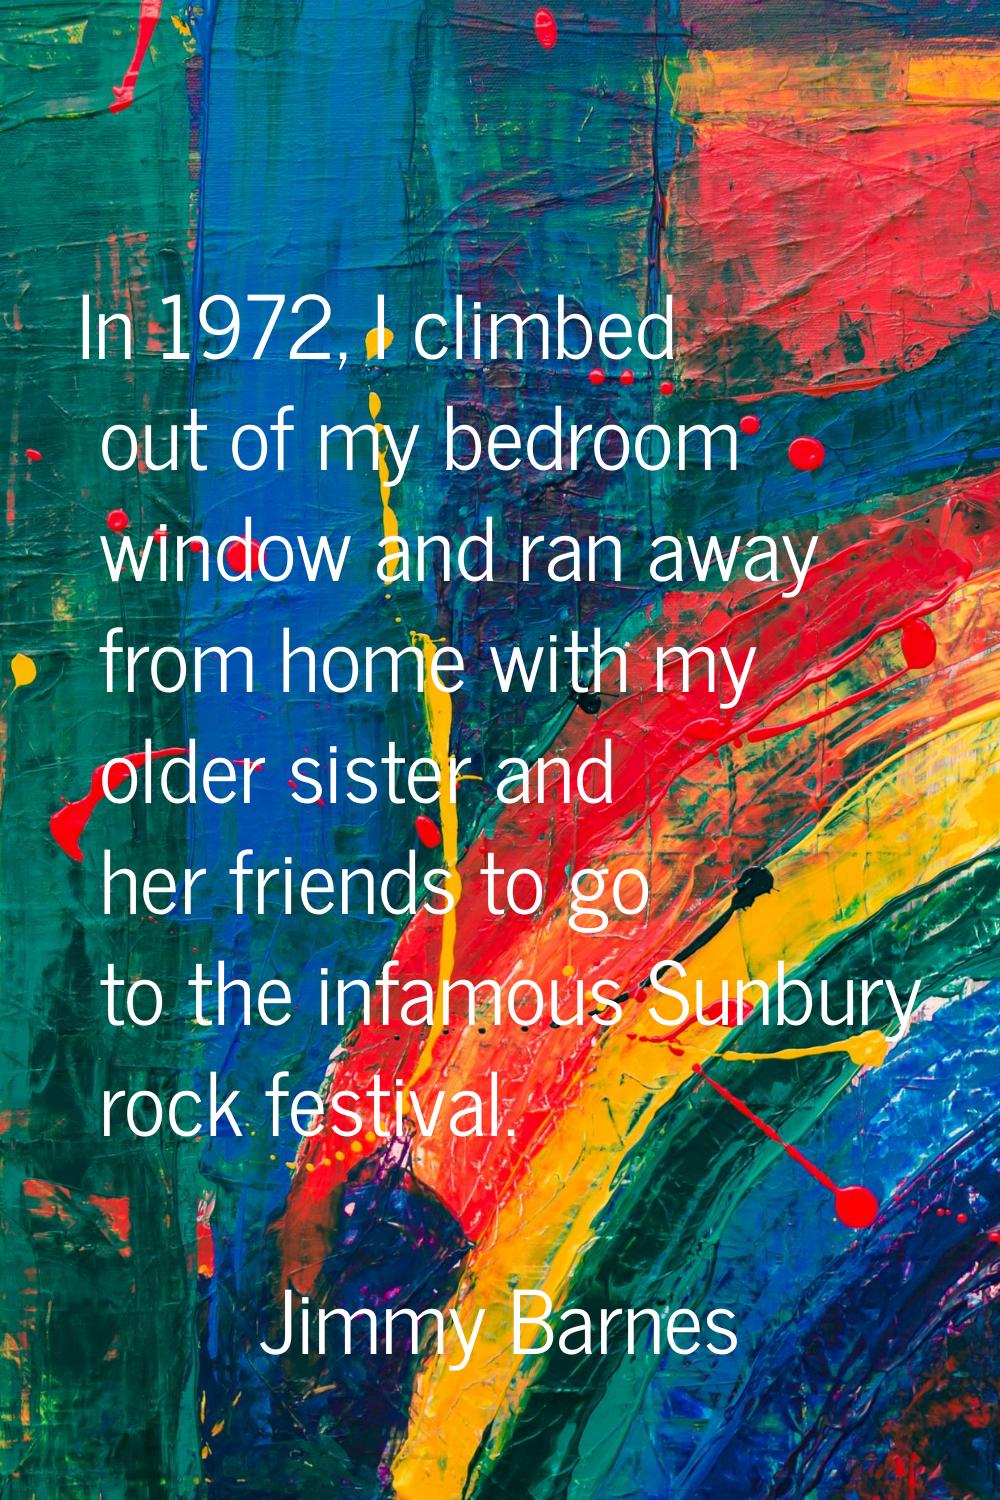 In 1972, I climbed out of my bedroom window and ran away from home with my older sister and her fri